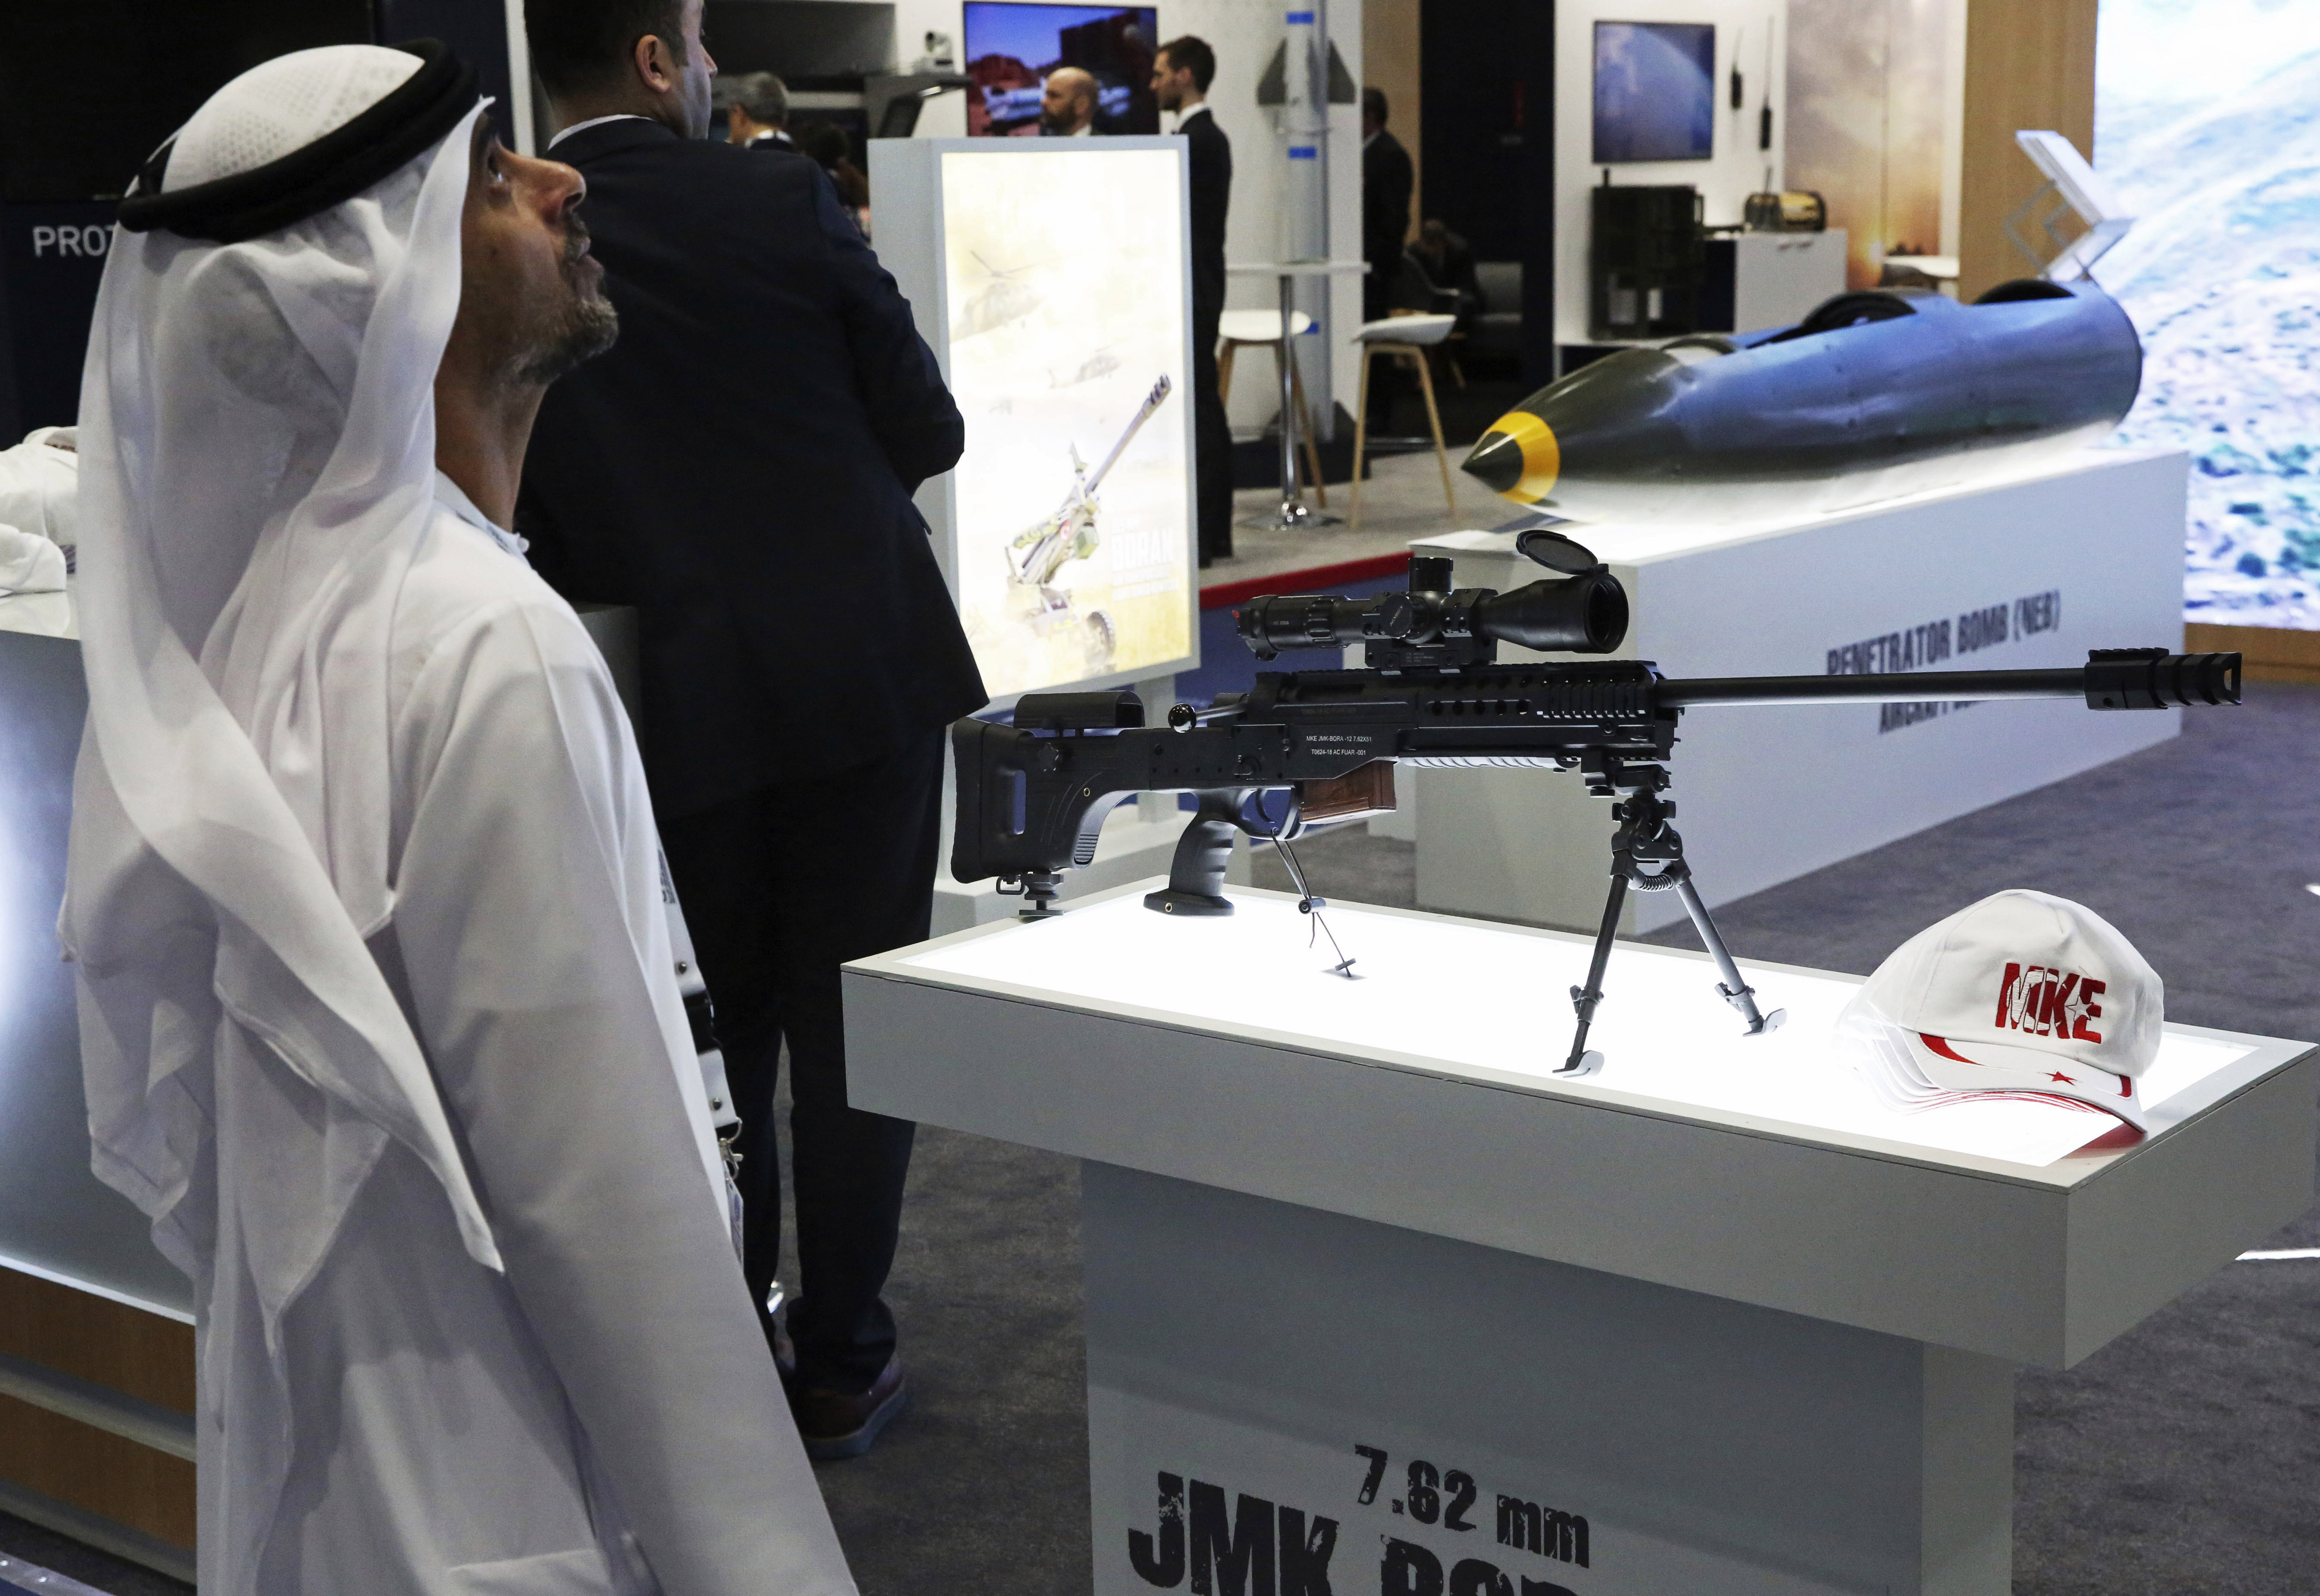 An Emirati looks at a display near a Turkish-made JMK Bora sniper rifle at the International Defense Exhibition and Conference in Abu Dhabi, United Arab Emirates, Sunday, Feb. 17, 2019. The biennial arms show in Abu Dhabi comes as the United Arab Emirates faces increasing criticism for its role in the yearlong war in Yemen. (AP Photo/Jon Gambrell)